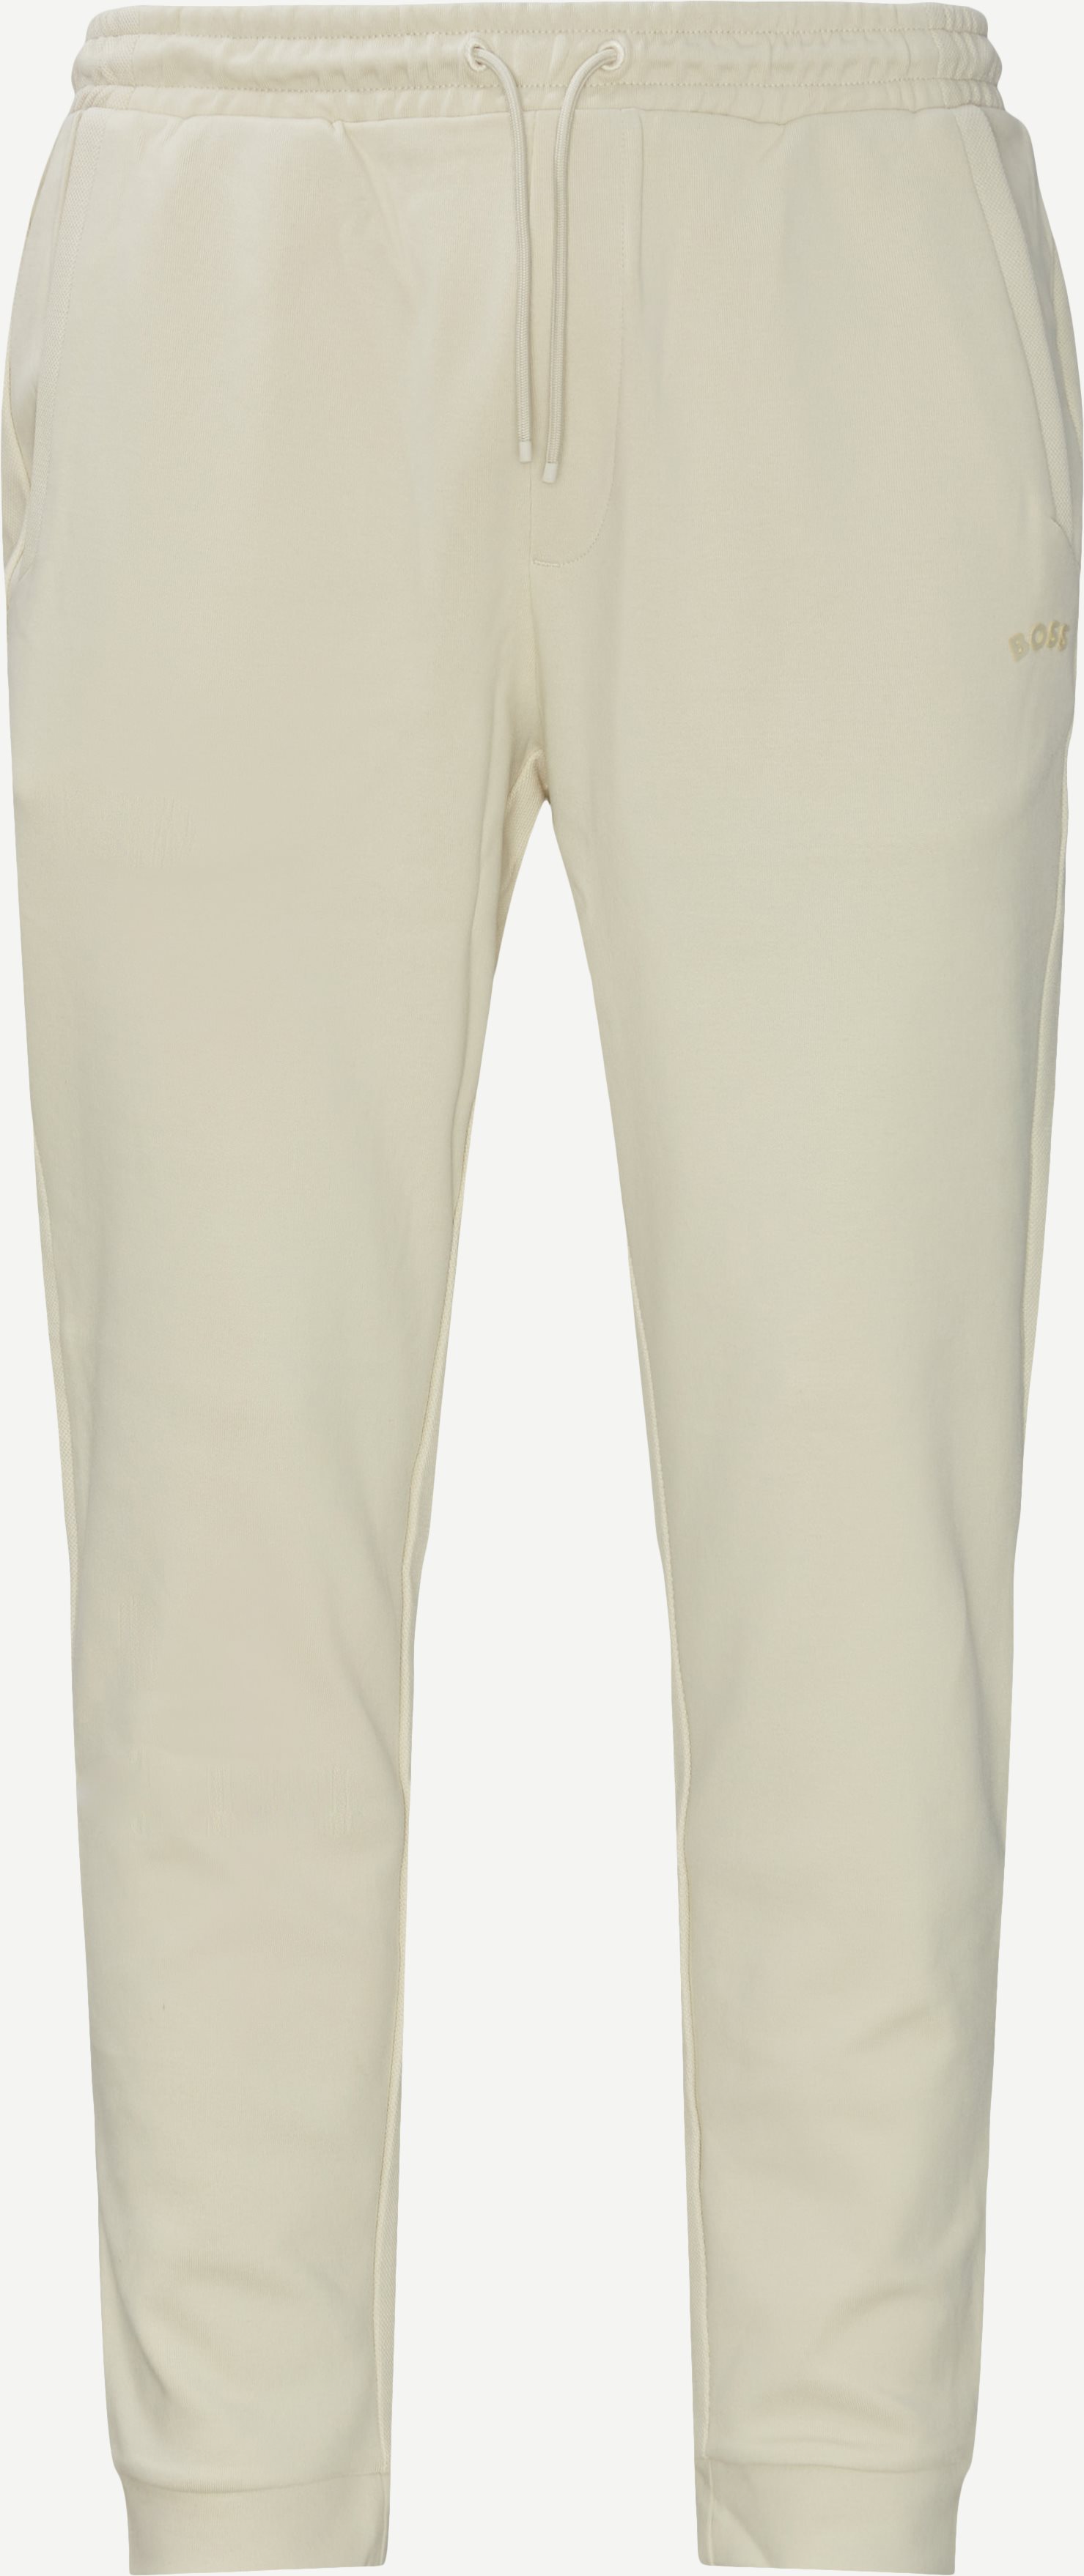 BOSS Athleisure Trousers 50469098 HADIKO CURVED 2202 Sand